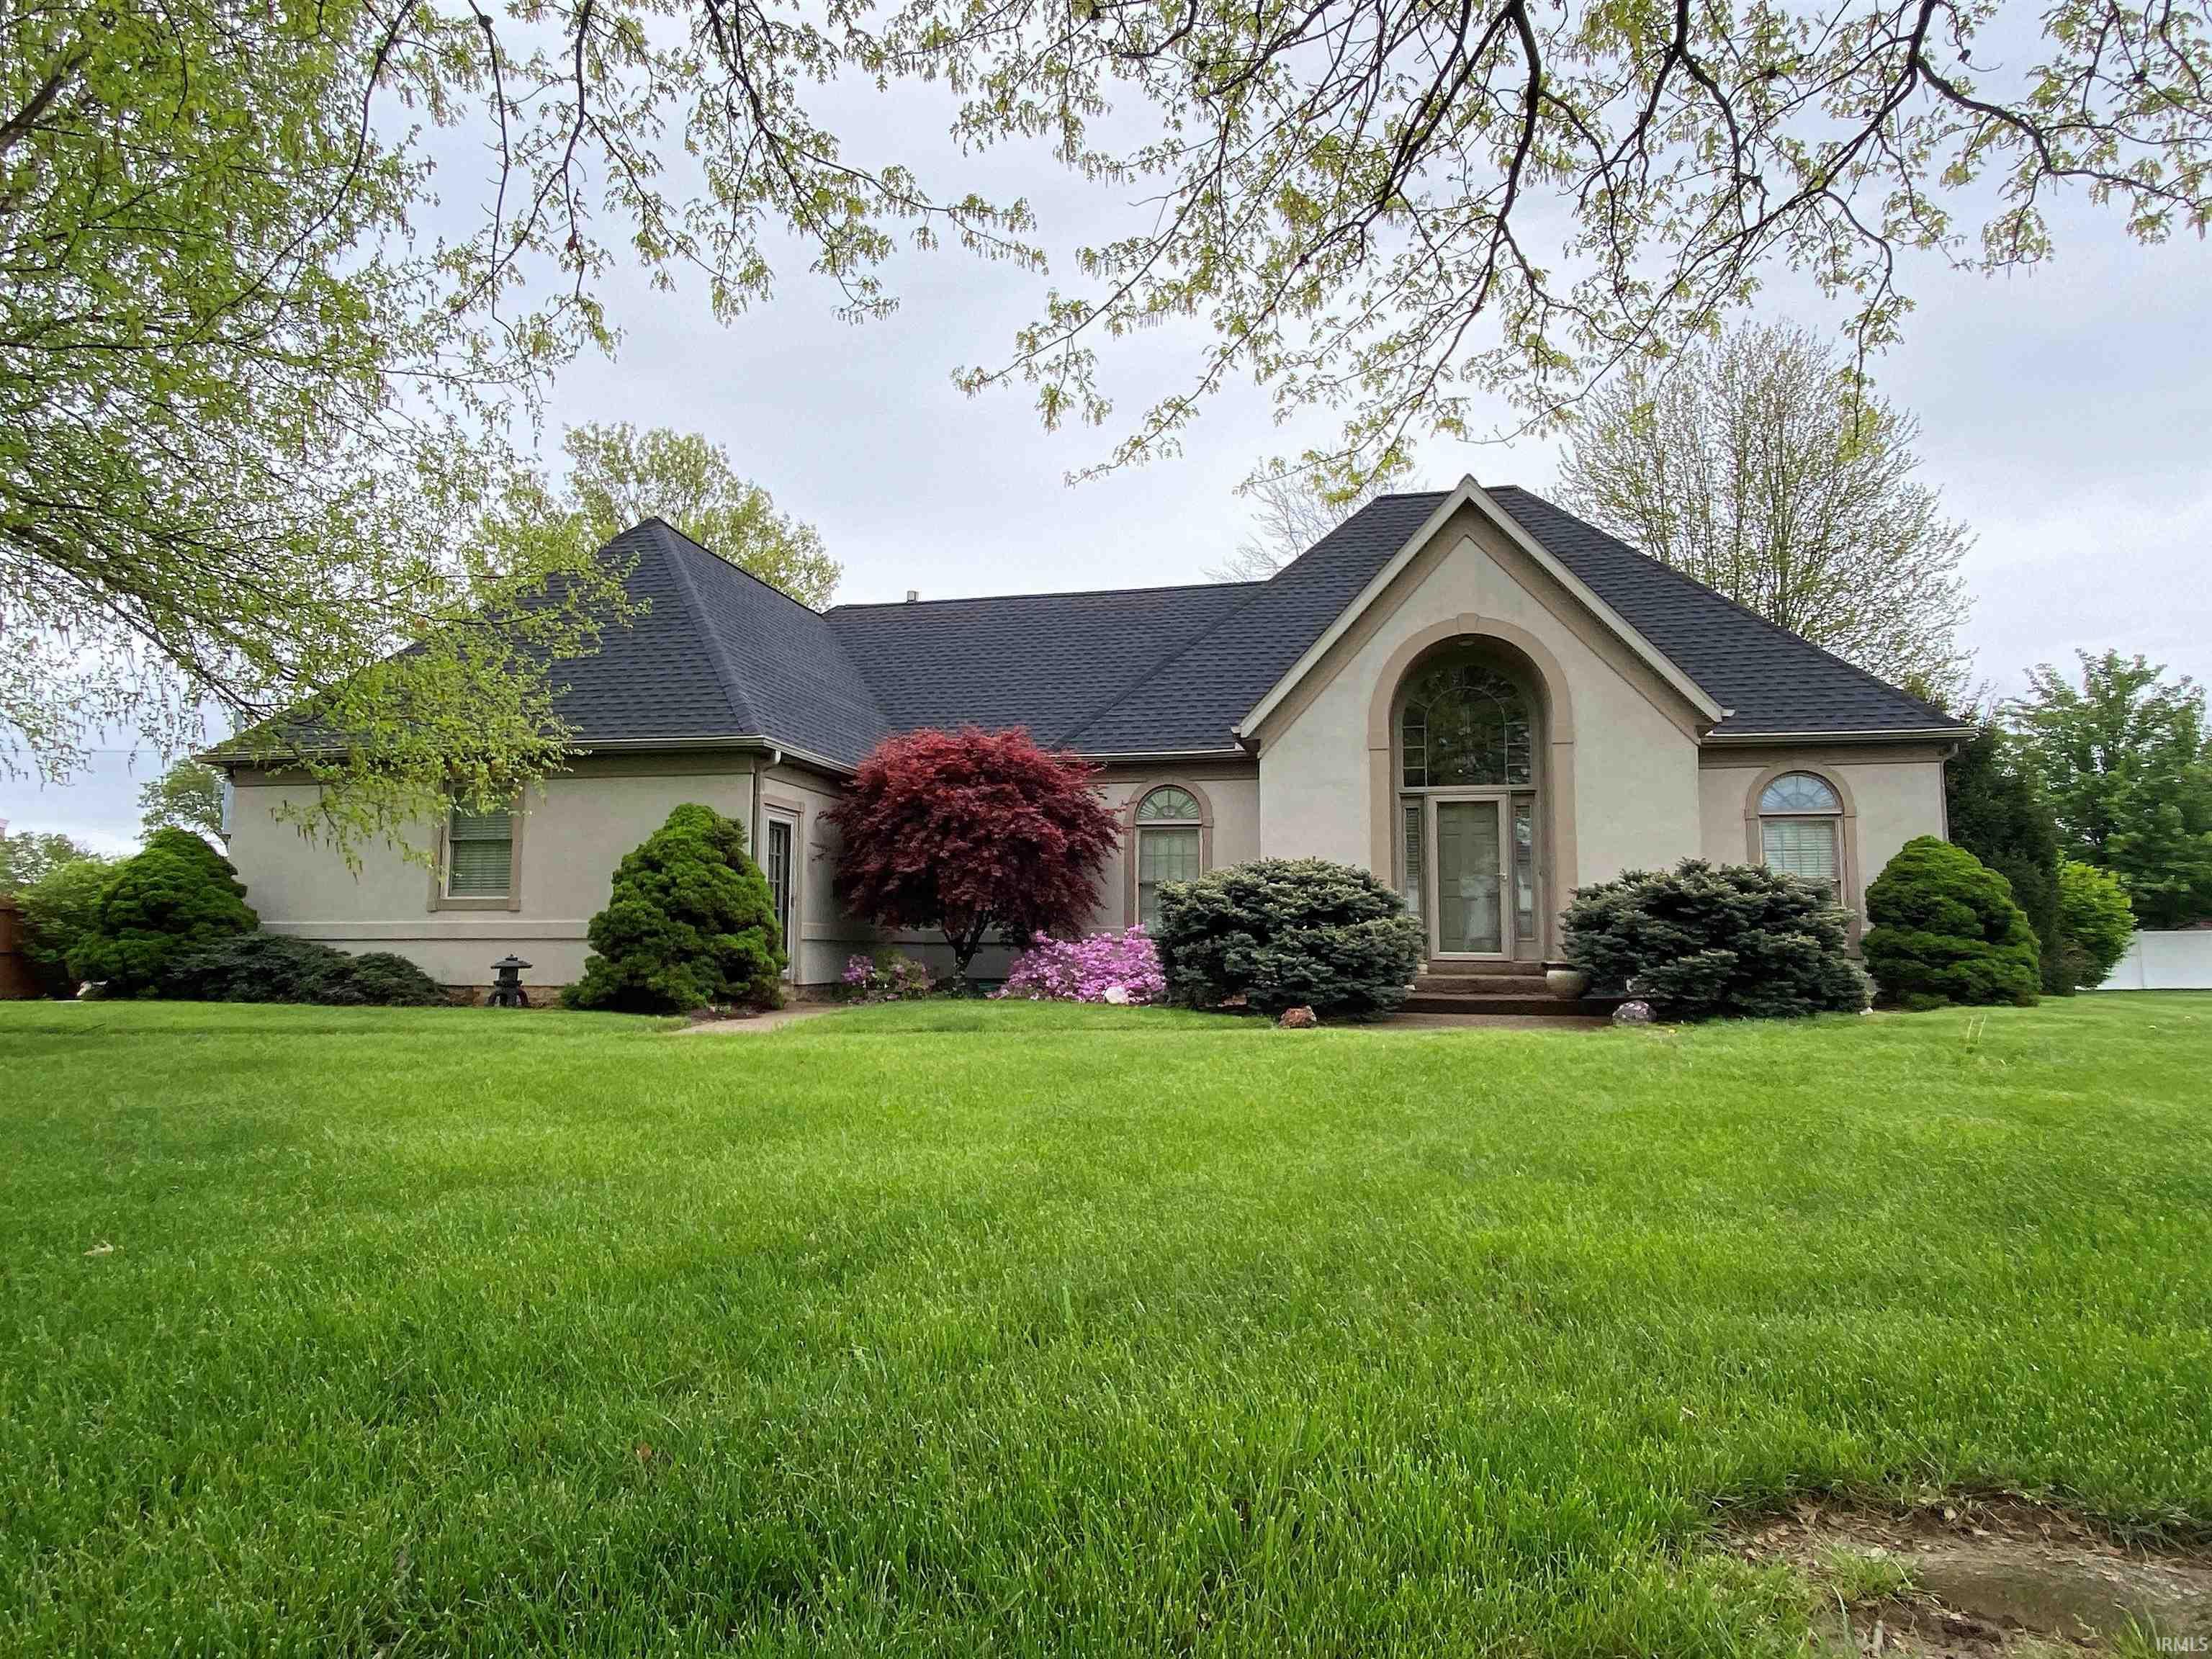 310 E Meade Drive, Evansville, IN 47715